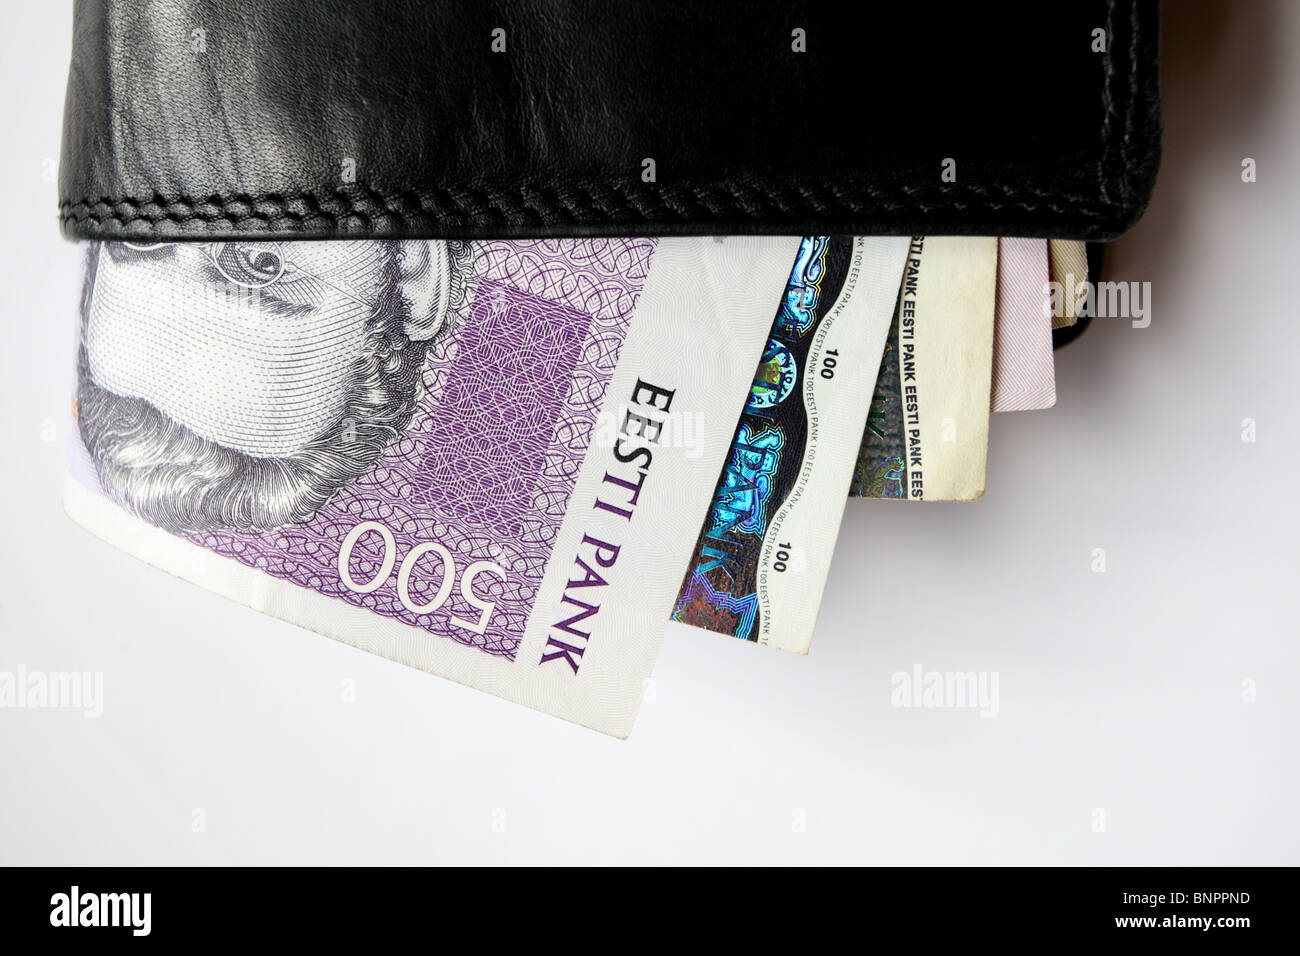 Black leather wallet and Estonian paper money sticking out. Stock Photo